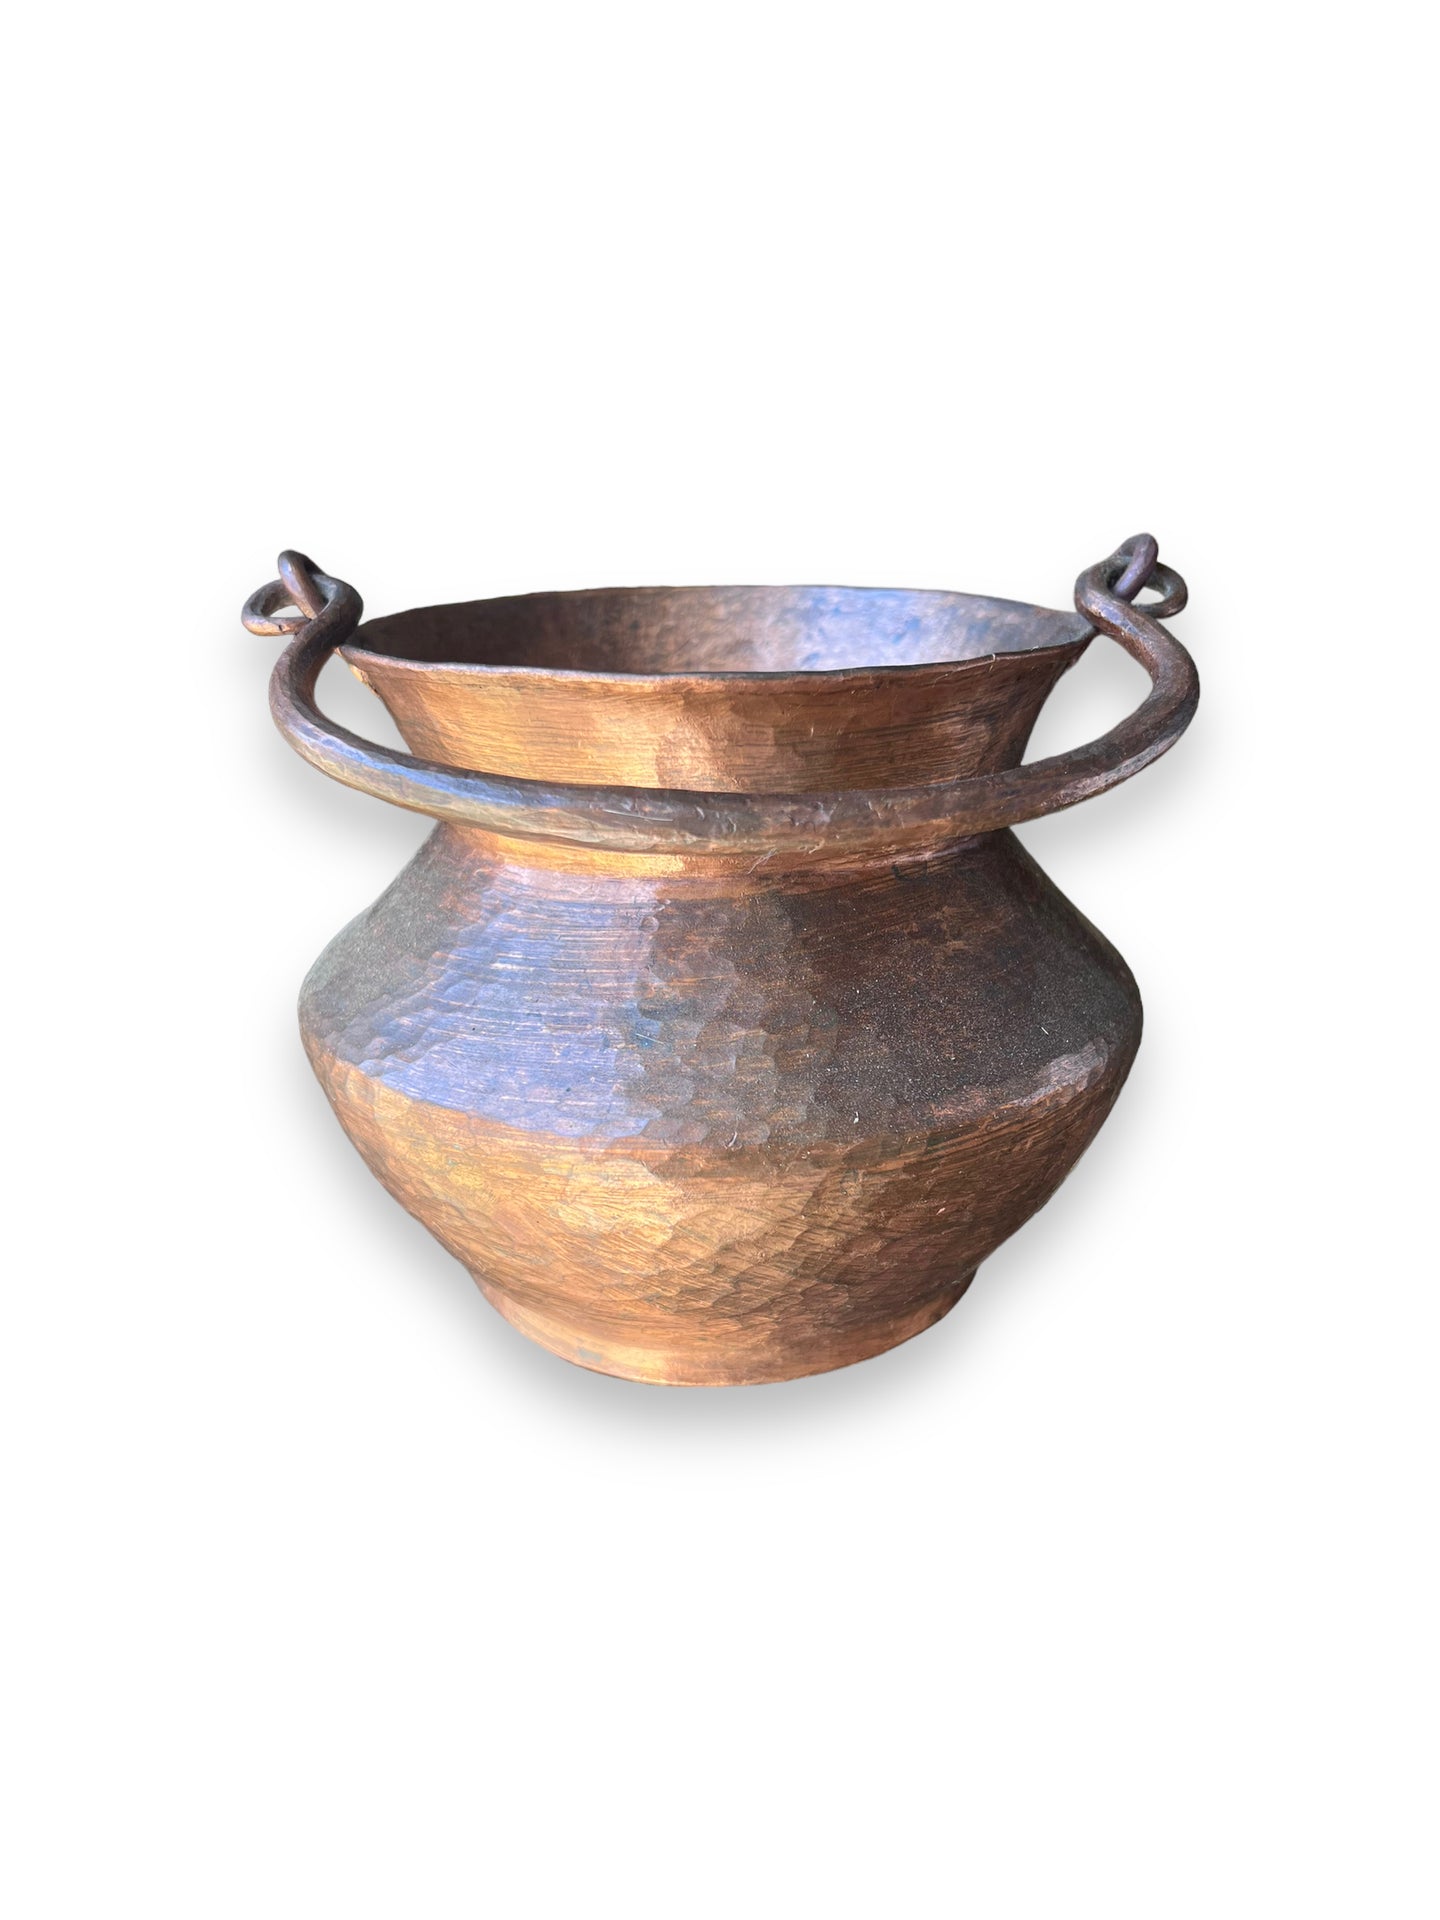 copper pot with handle